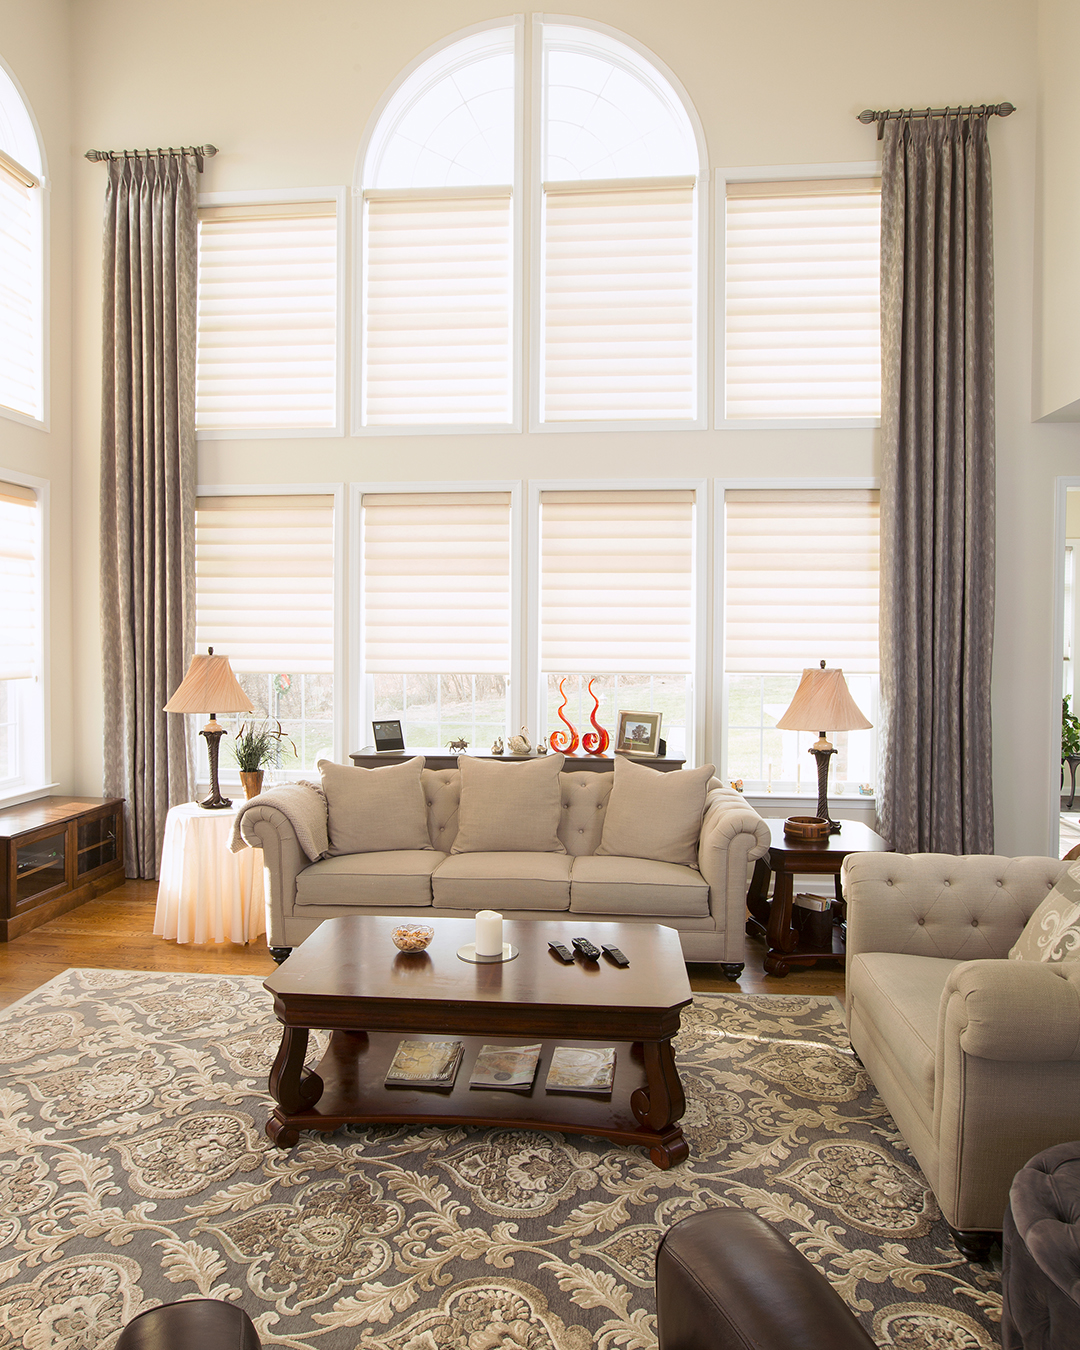 How To Design Two-Story Window Treatments